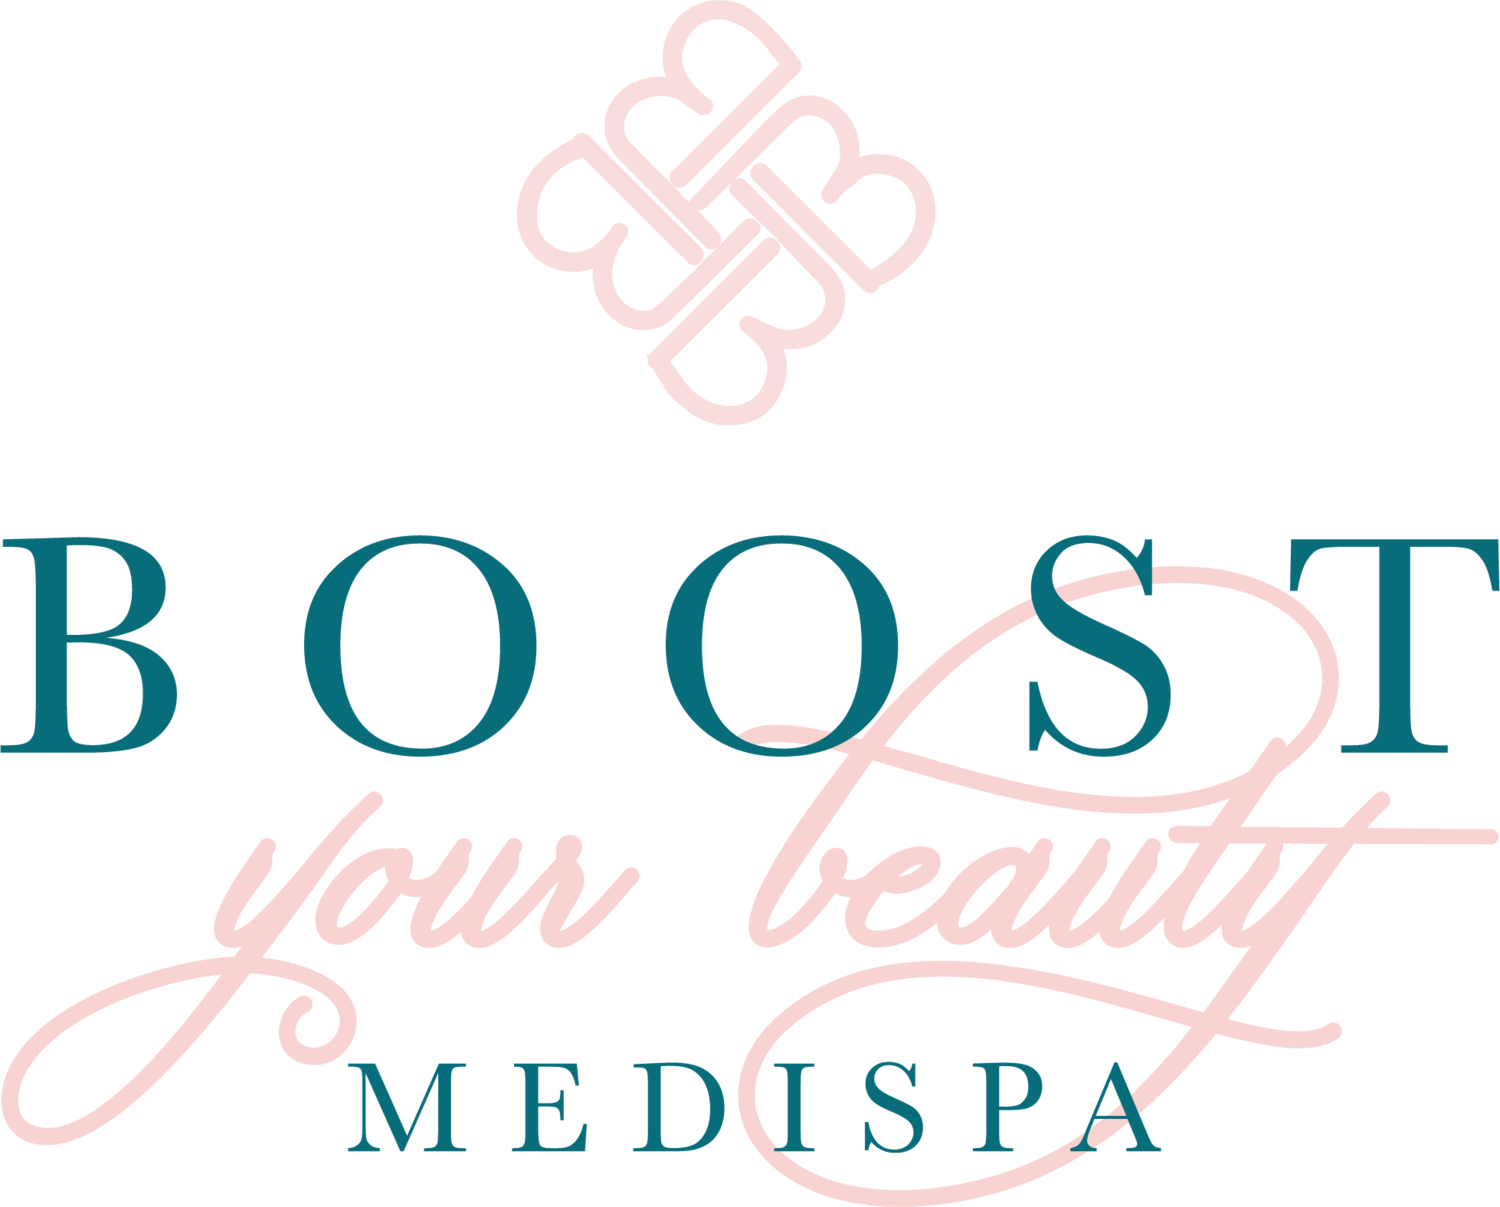 Gerald A. Acker, MD managed by Boost Your Beauty MediSpa